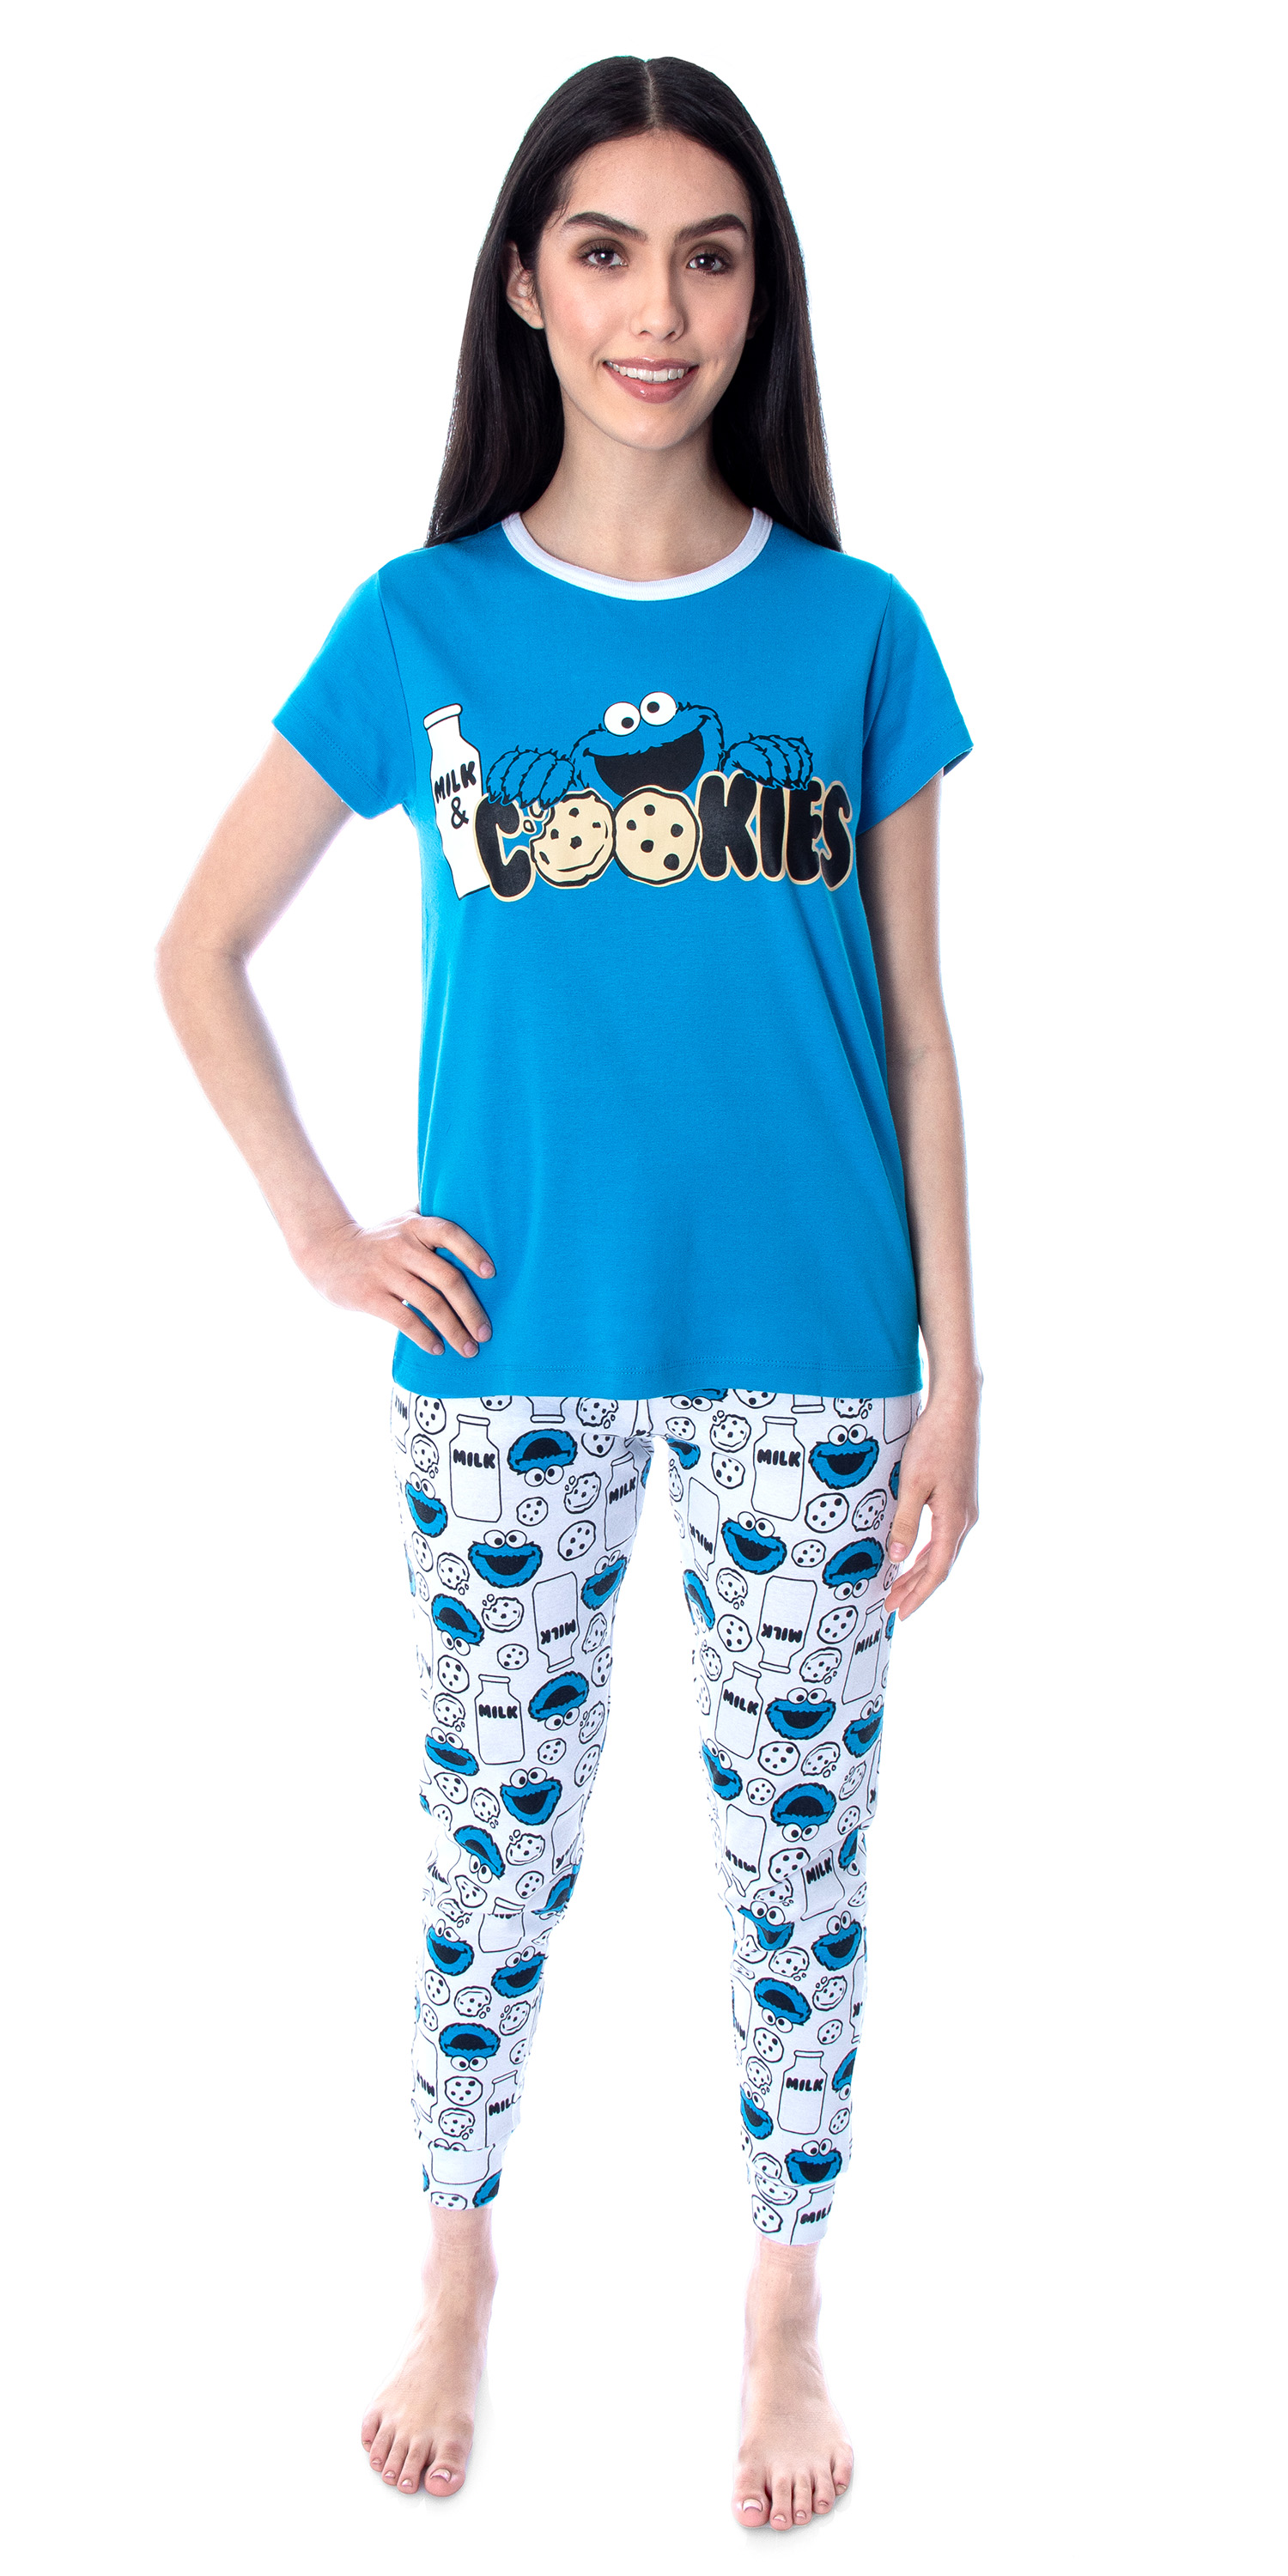 Seven Times Six Sesame Street Cookie Monster Pajamas Mommy and Me Matching Pajama Set - Women's, Kid's, and Toddlers Sizes